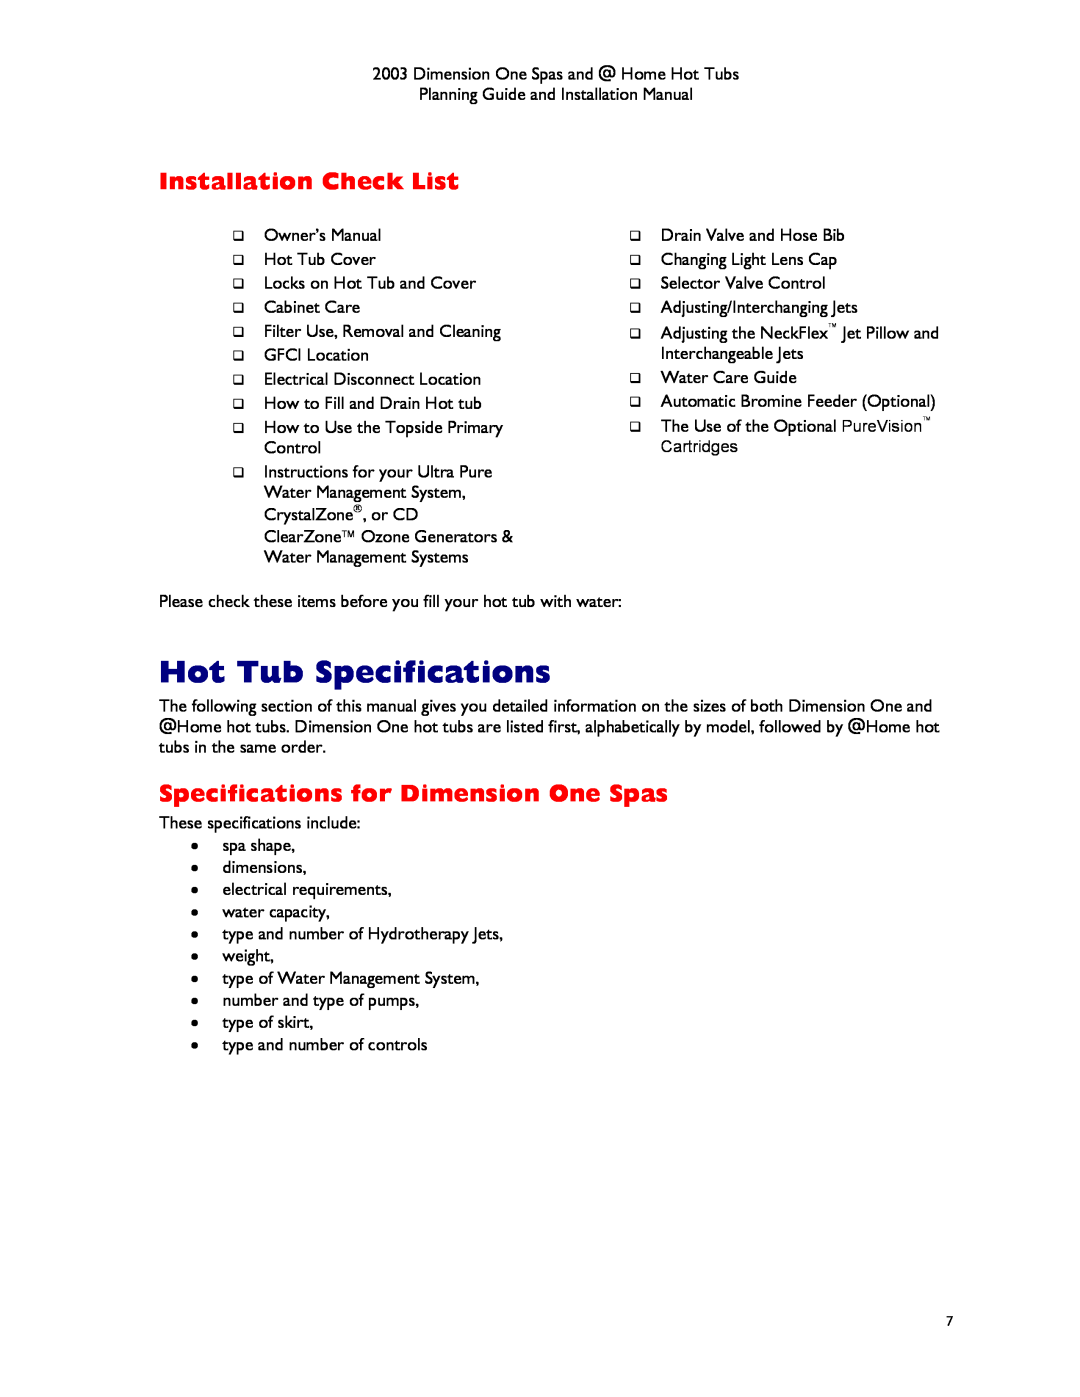 Dimension One Spas manual Hot Tub Specifications, Installation Check List, Specifications for Dimension One Spas 